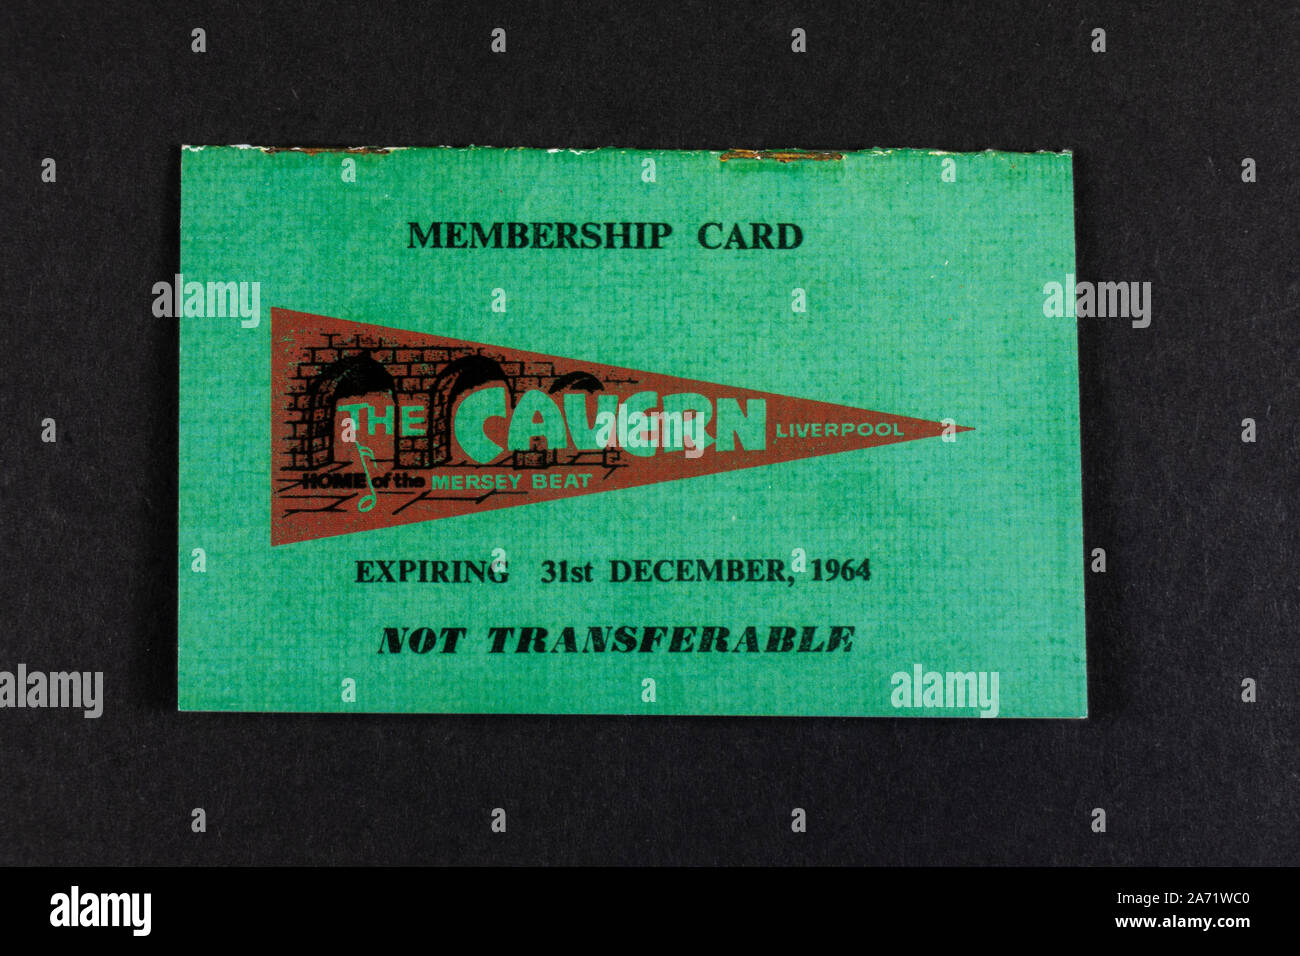 Replica memorabilia relating to the Beatles: Membership card for The Cavern in Liverpool, which expires 31st December 1964. Stock Photo